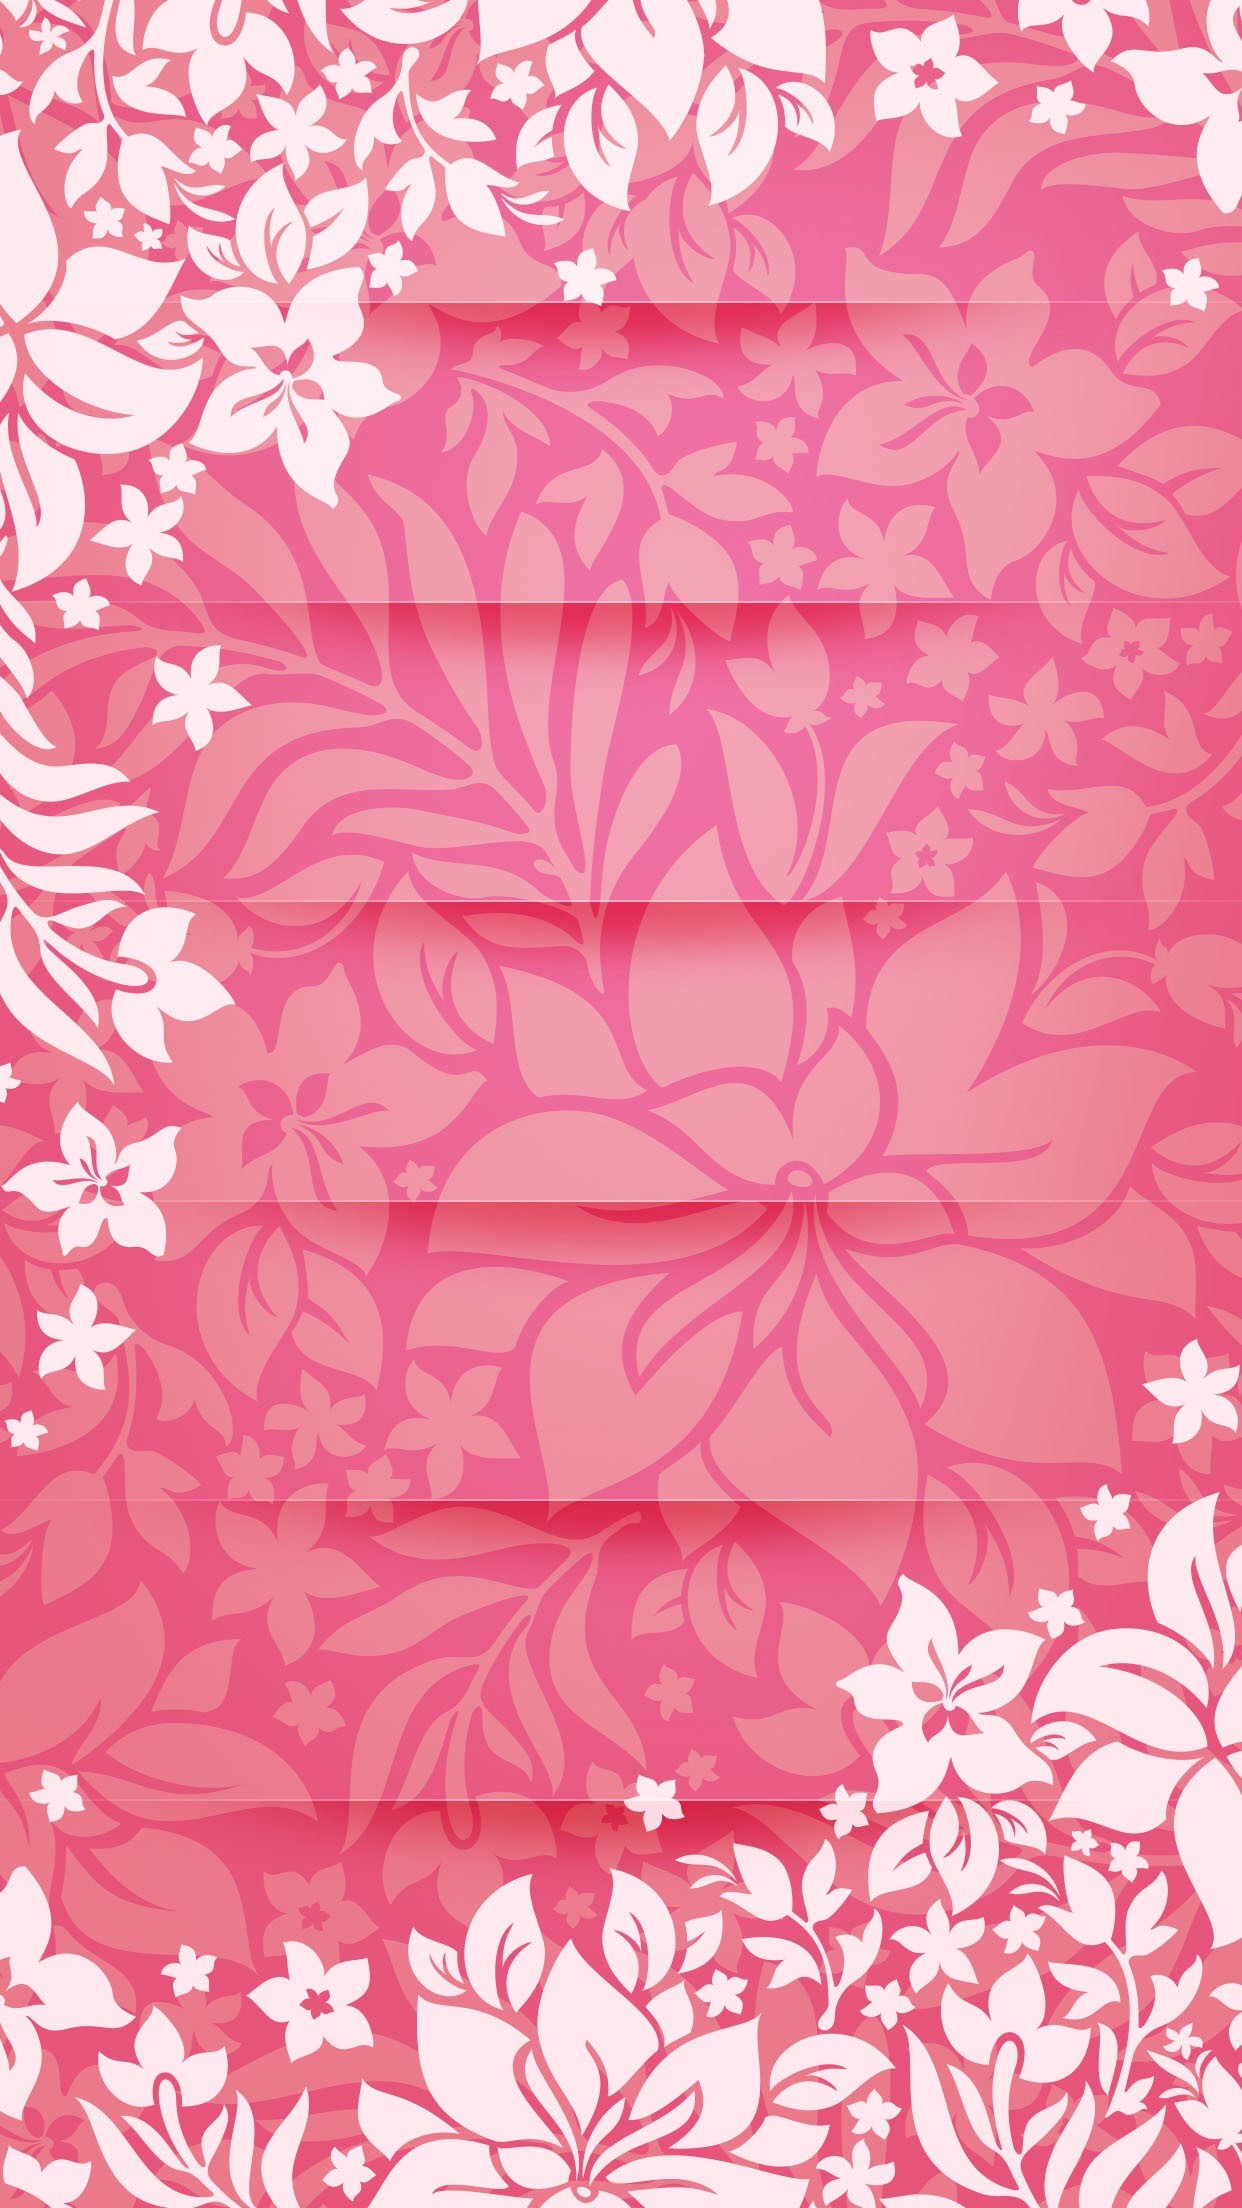 Shelves Flower Pattern Pink Tracery Unicolor Girly - Girly Background Hd - HD Wallpaper 